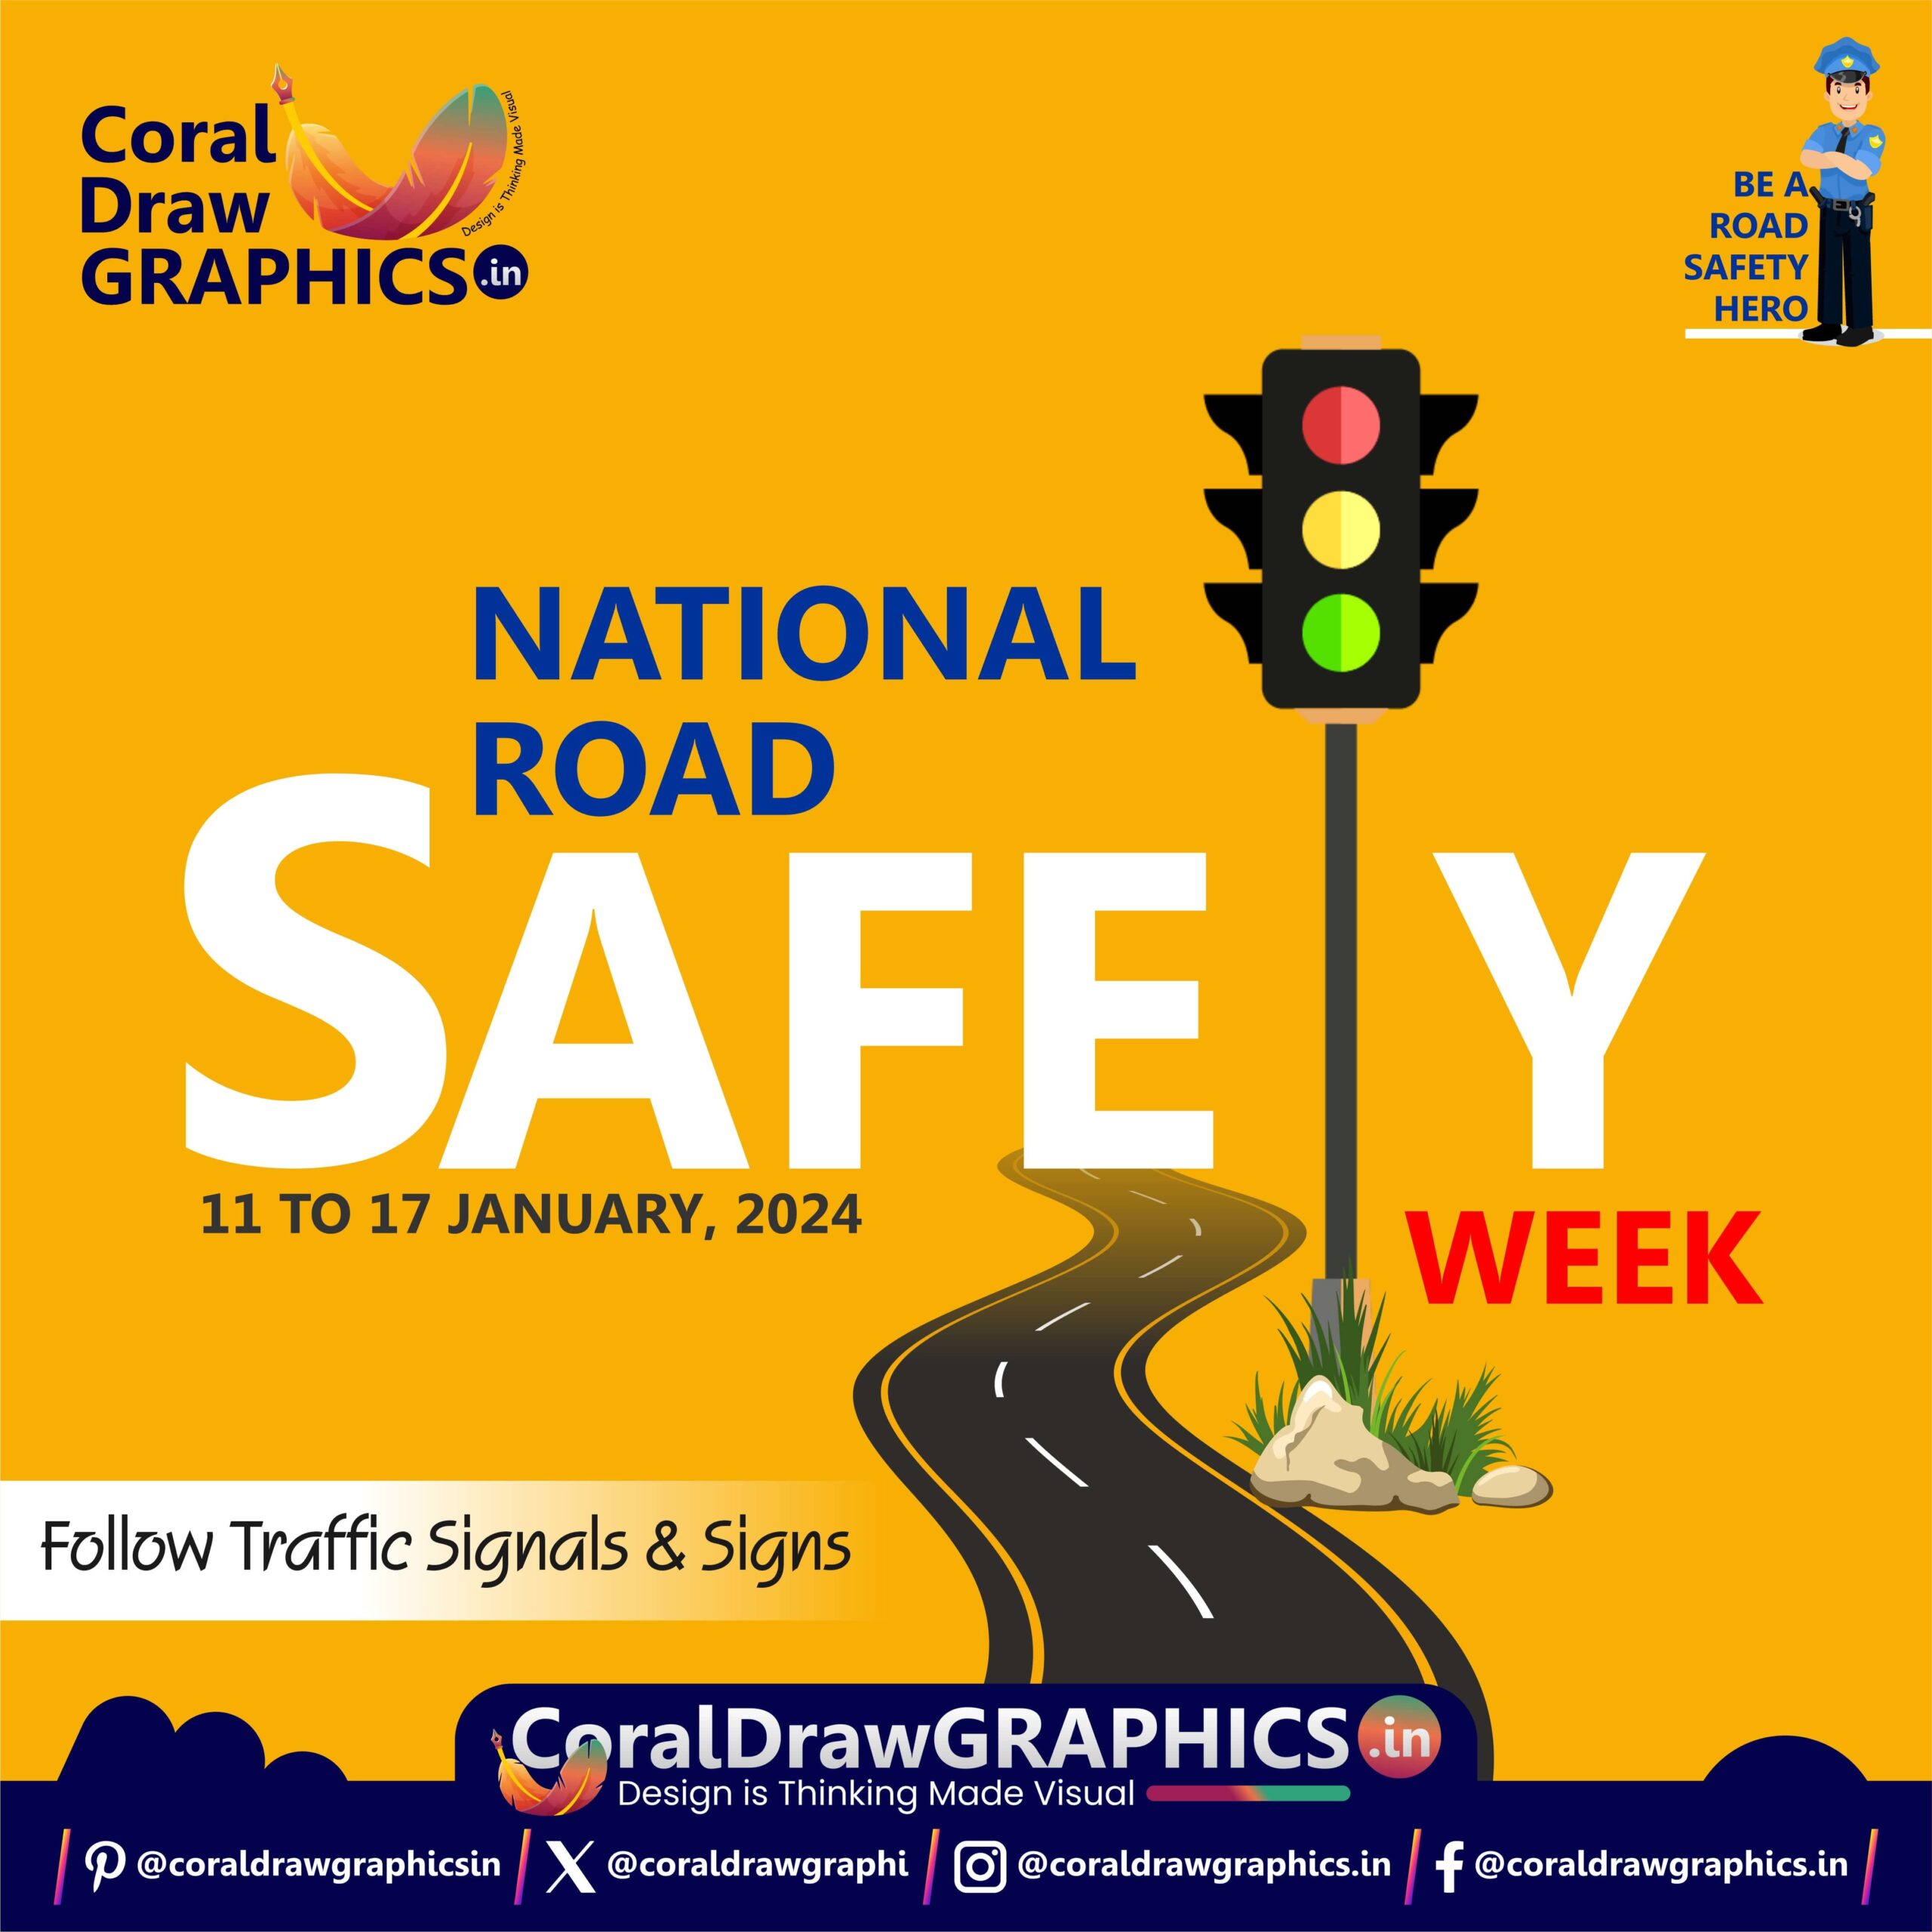 Day-1 Traffic Week Rules & Message